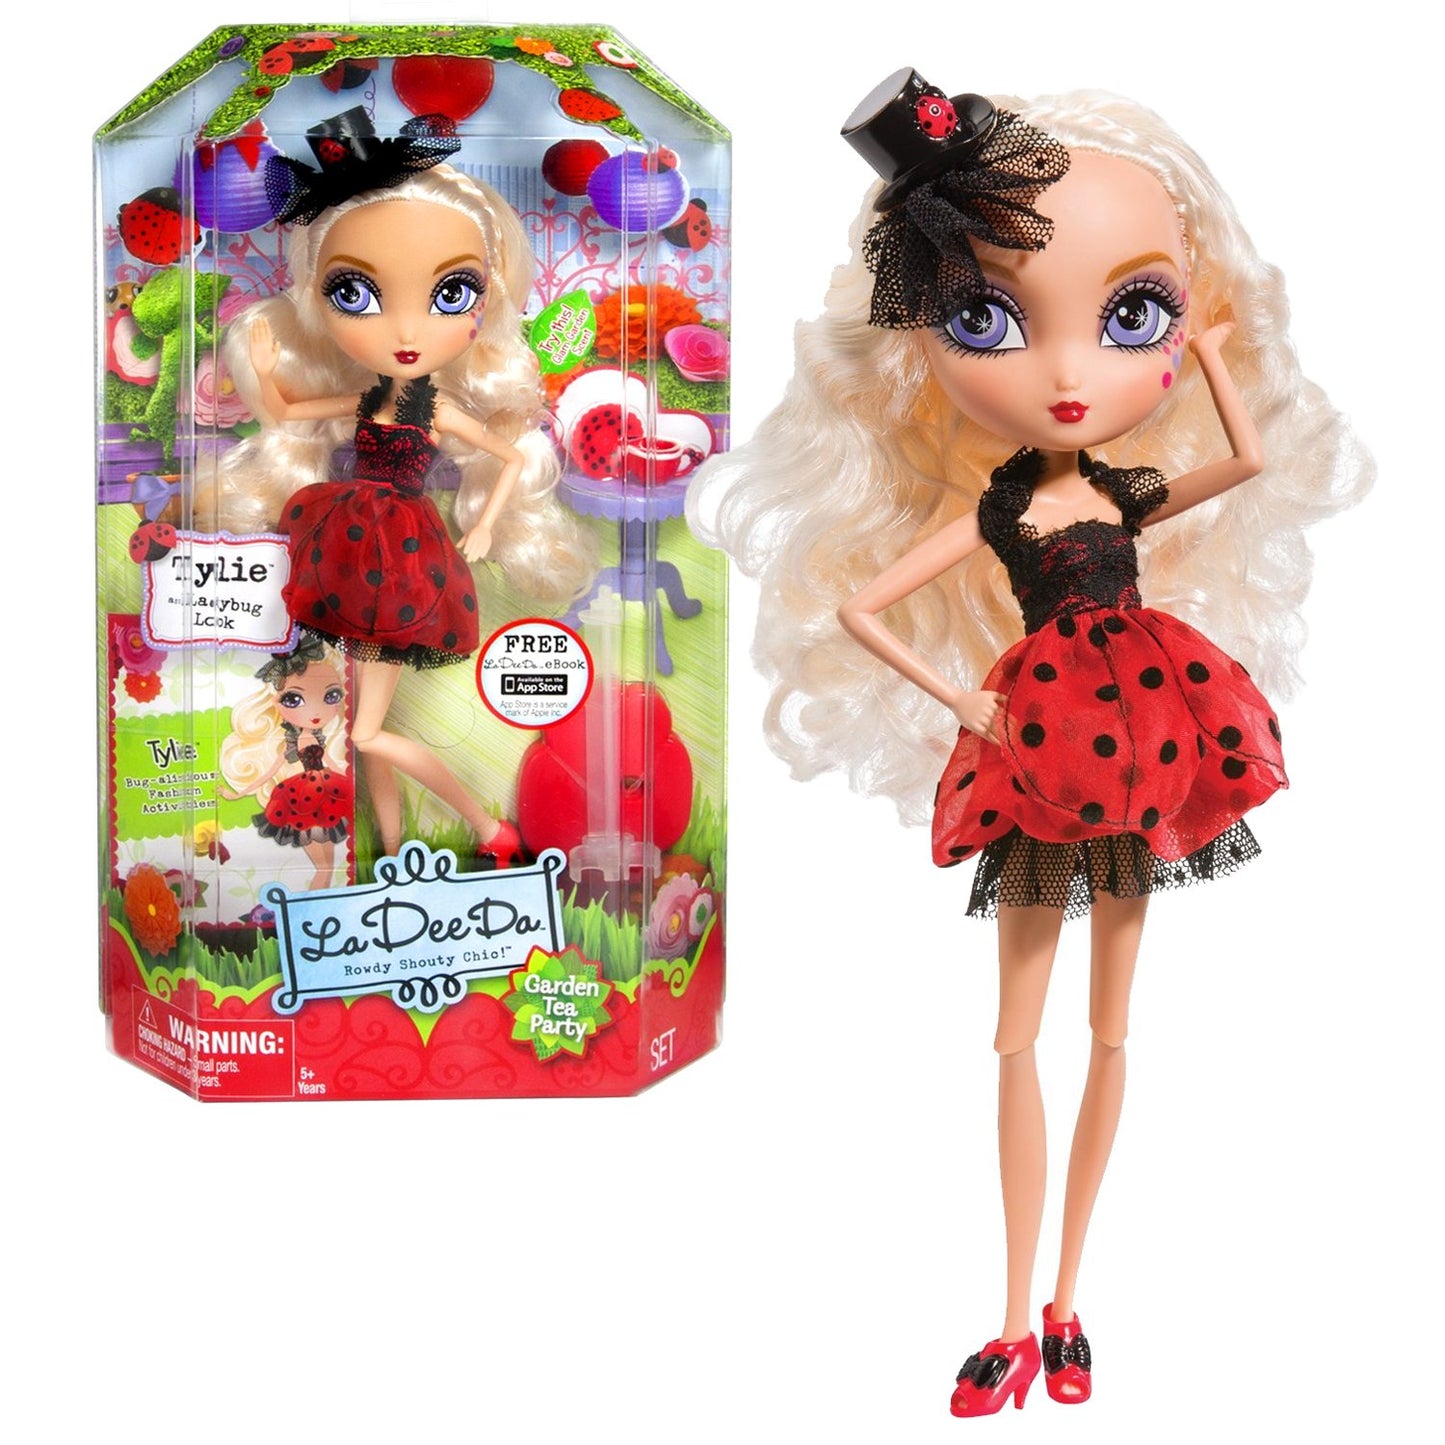 Tylie Ladybug Look Garden tea party - Spin Master 2012 - Chaussures